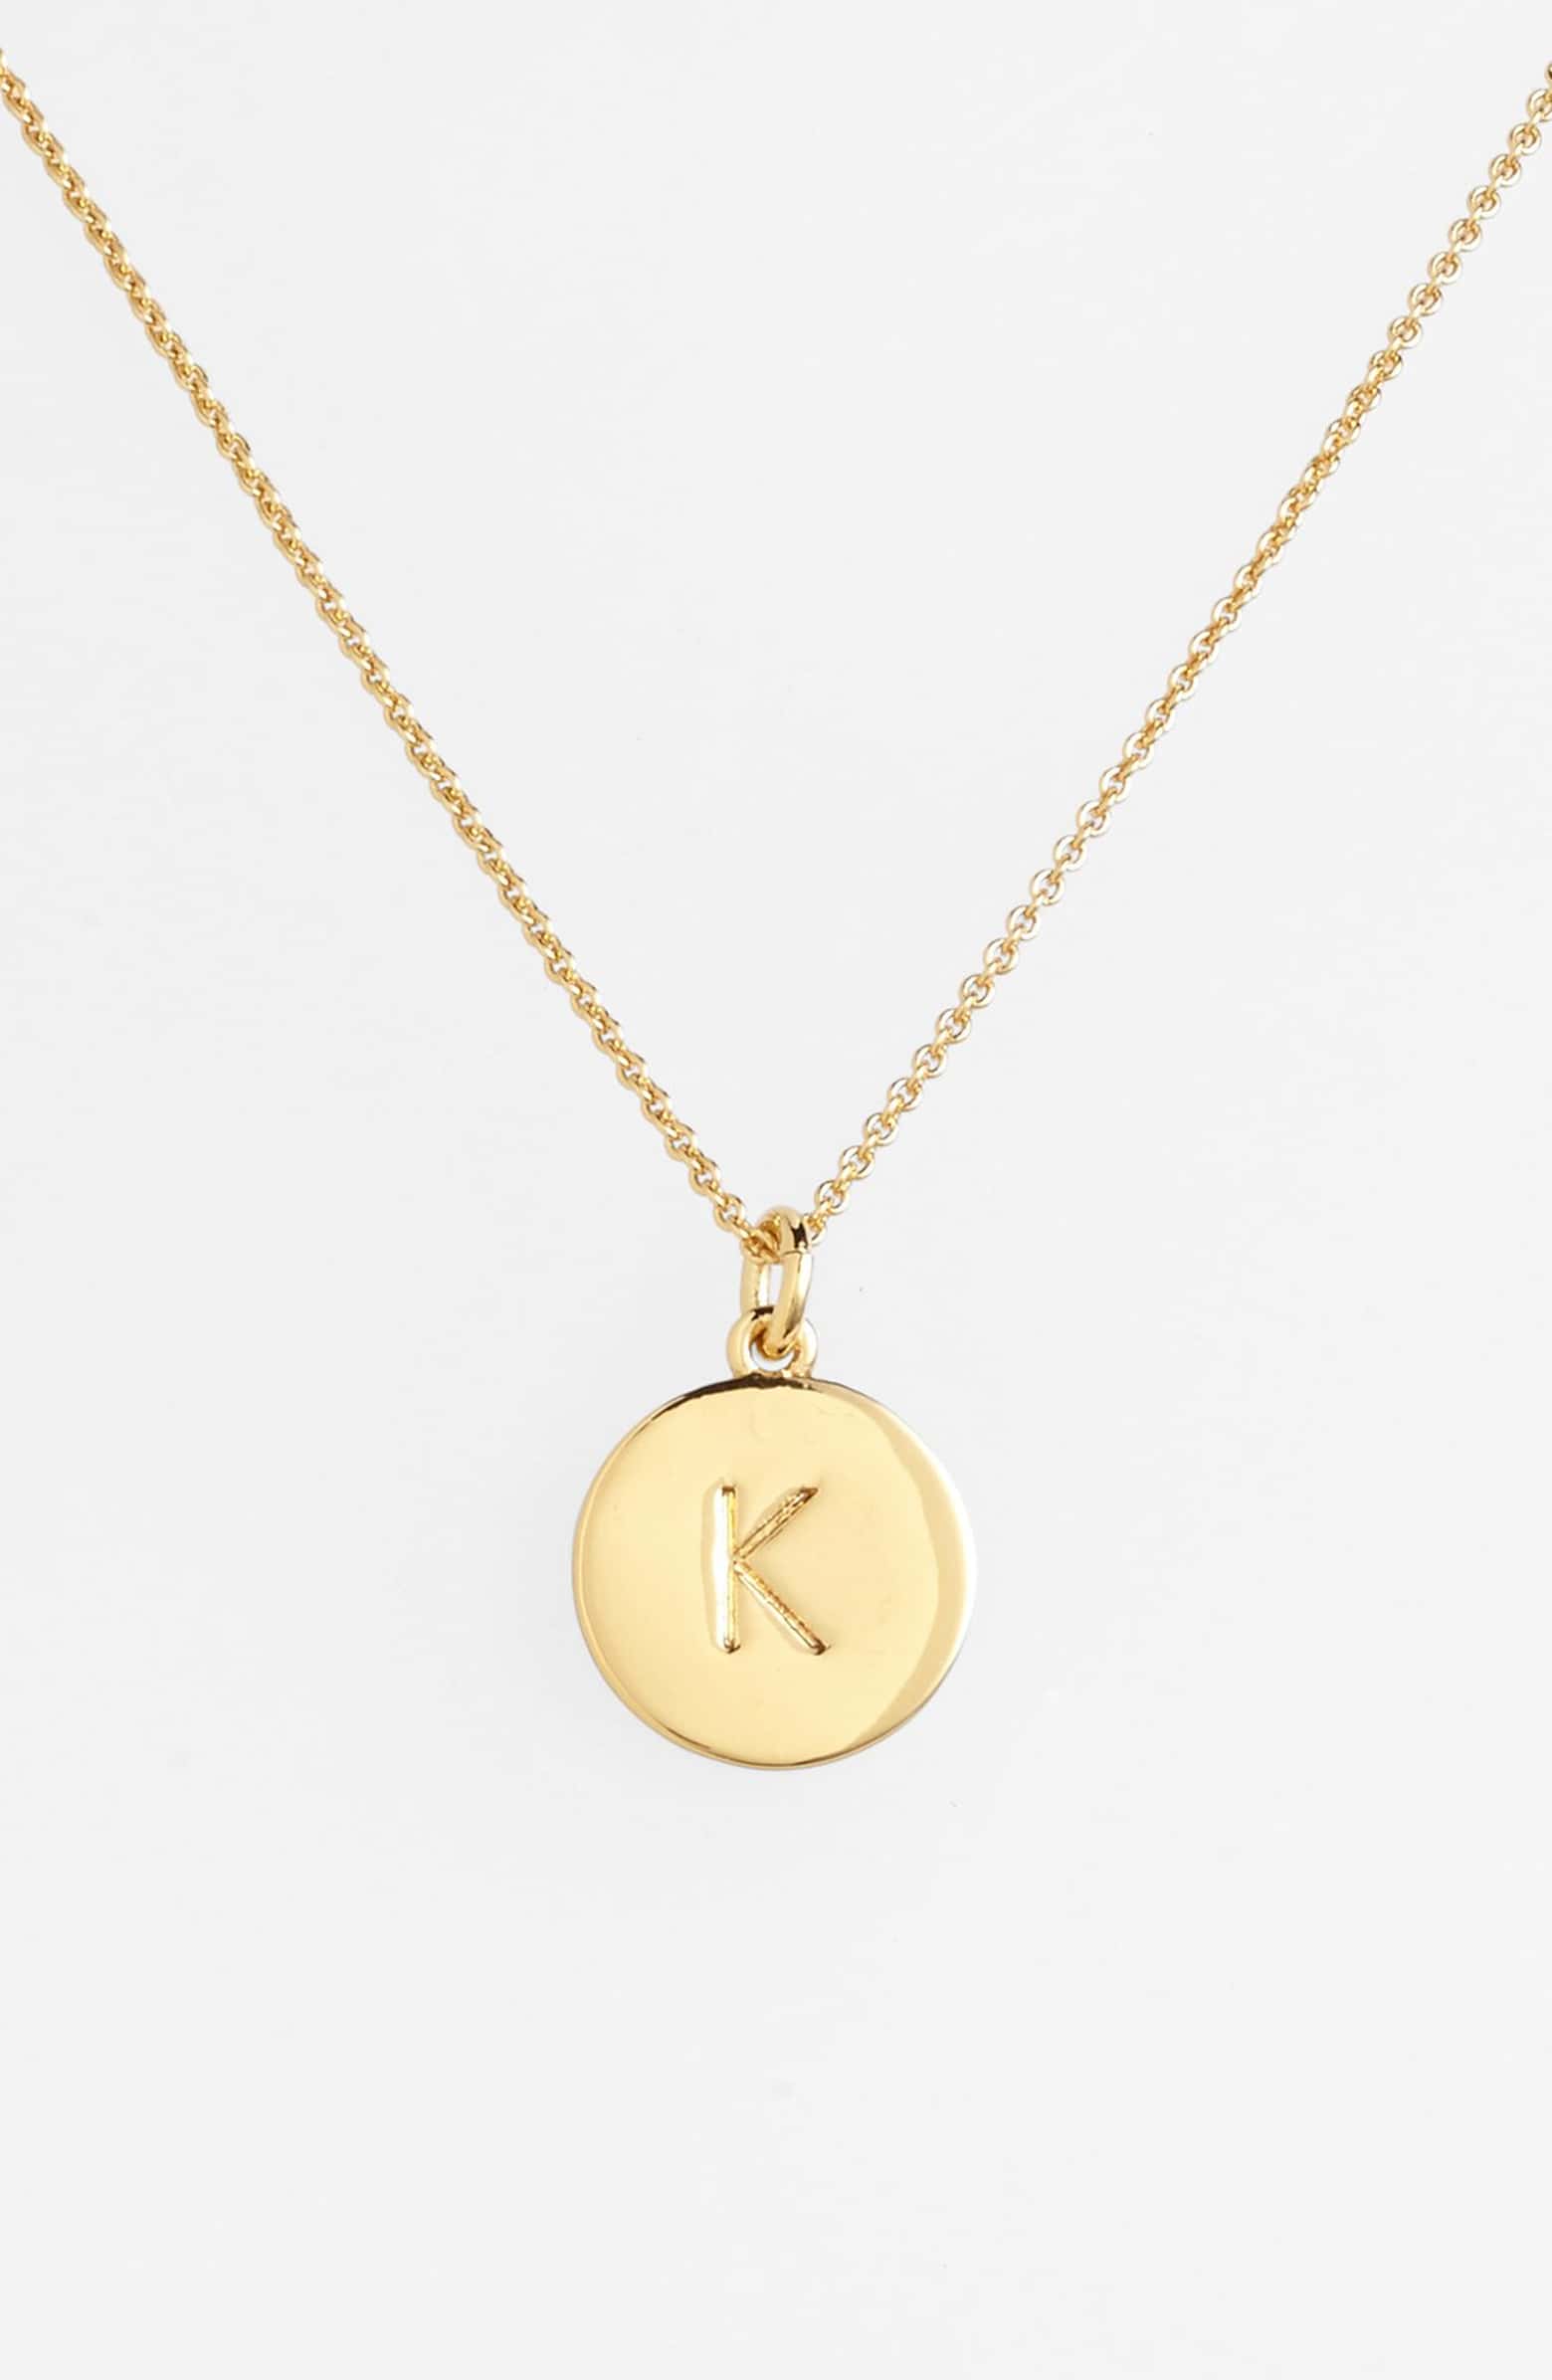 Nordstrom: Kate Spade Initial Necklace